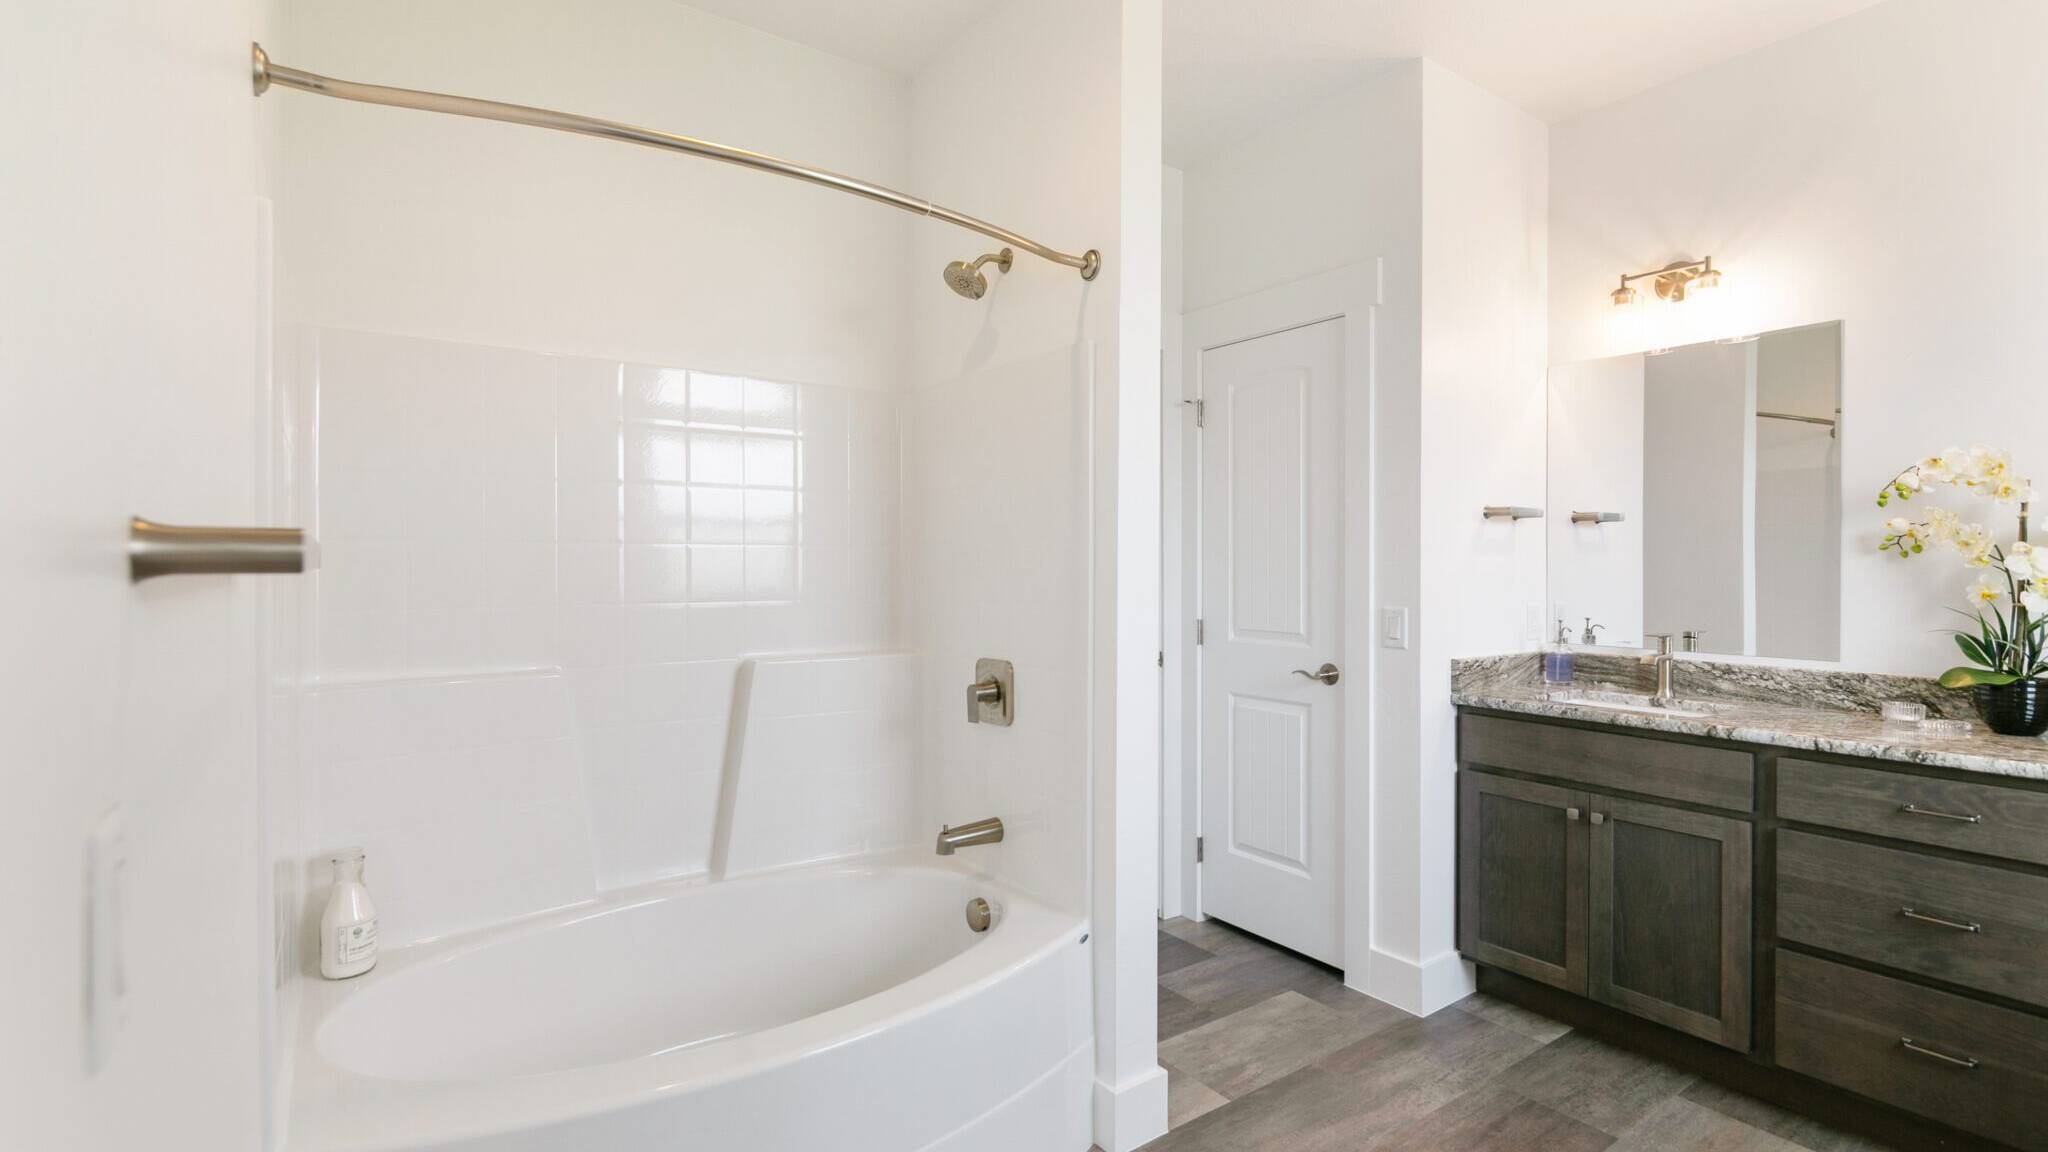 Master Bathroom in The Seeley model home - Built by Big Sky Builder in Hamilton, MT